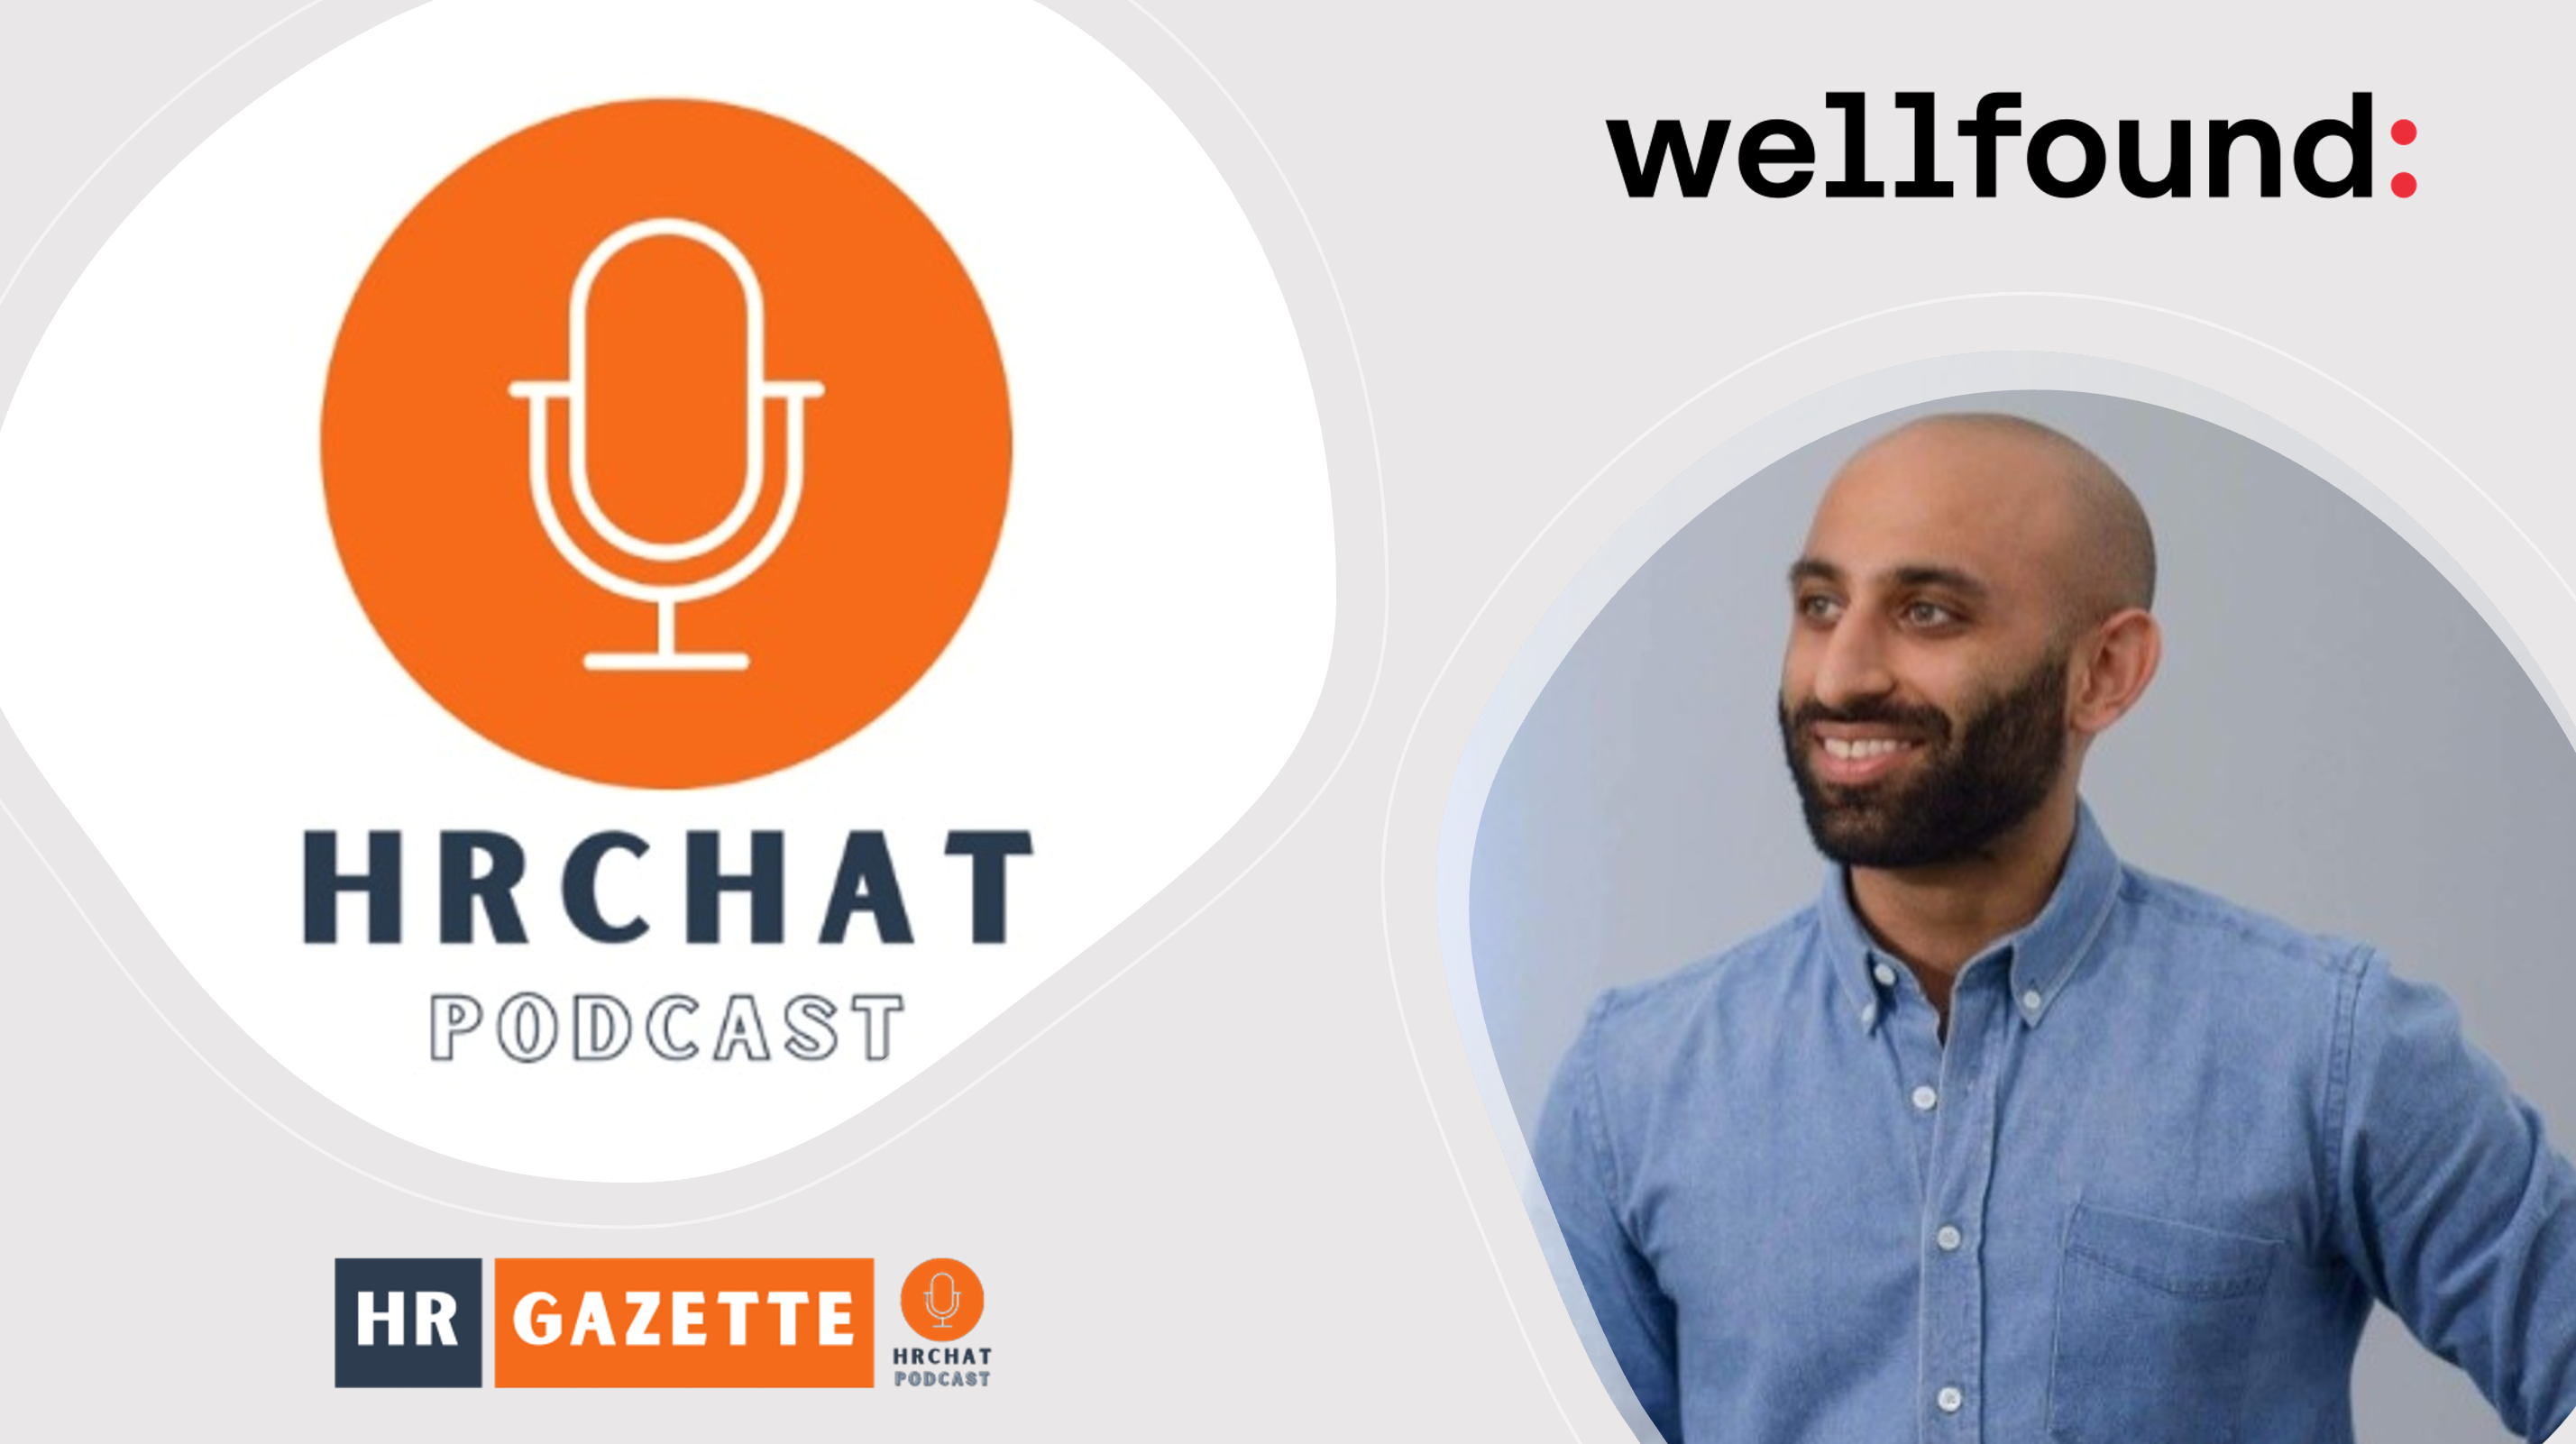 HRchat podcast